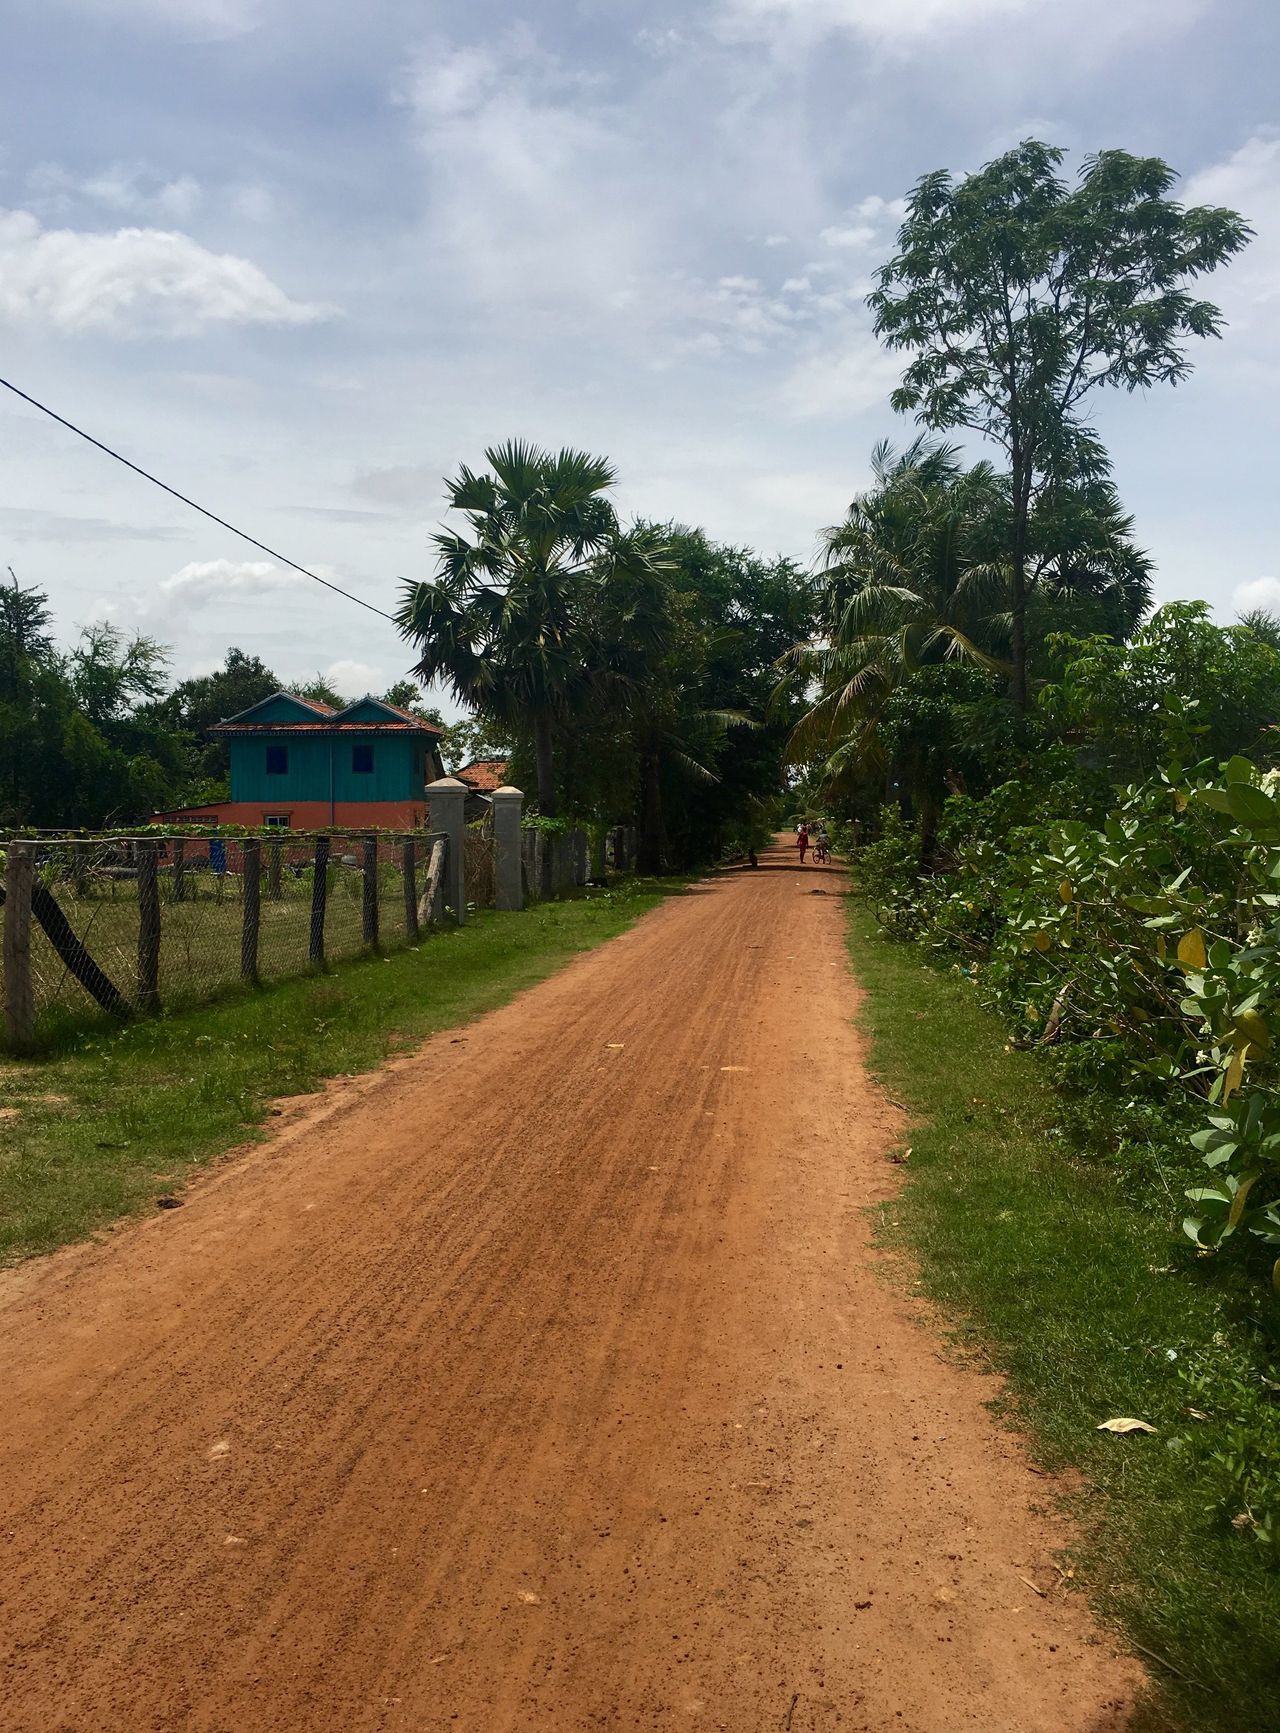 The dirt road in a Kampong Speu village on which many of the recruited brides drive to get to China.